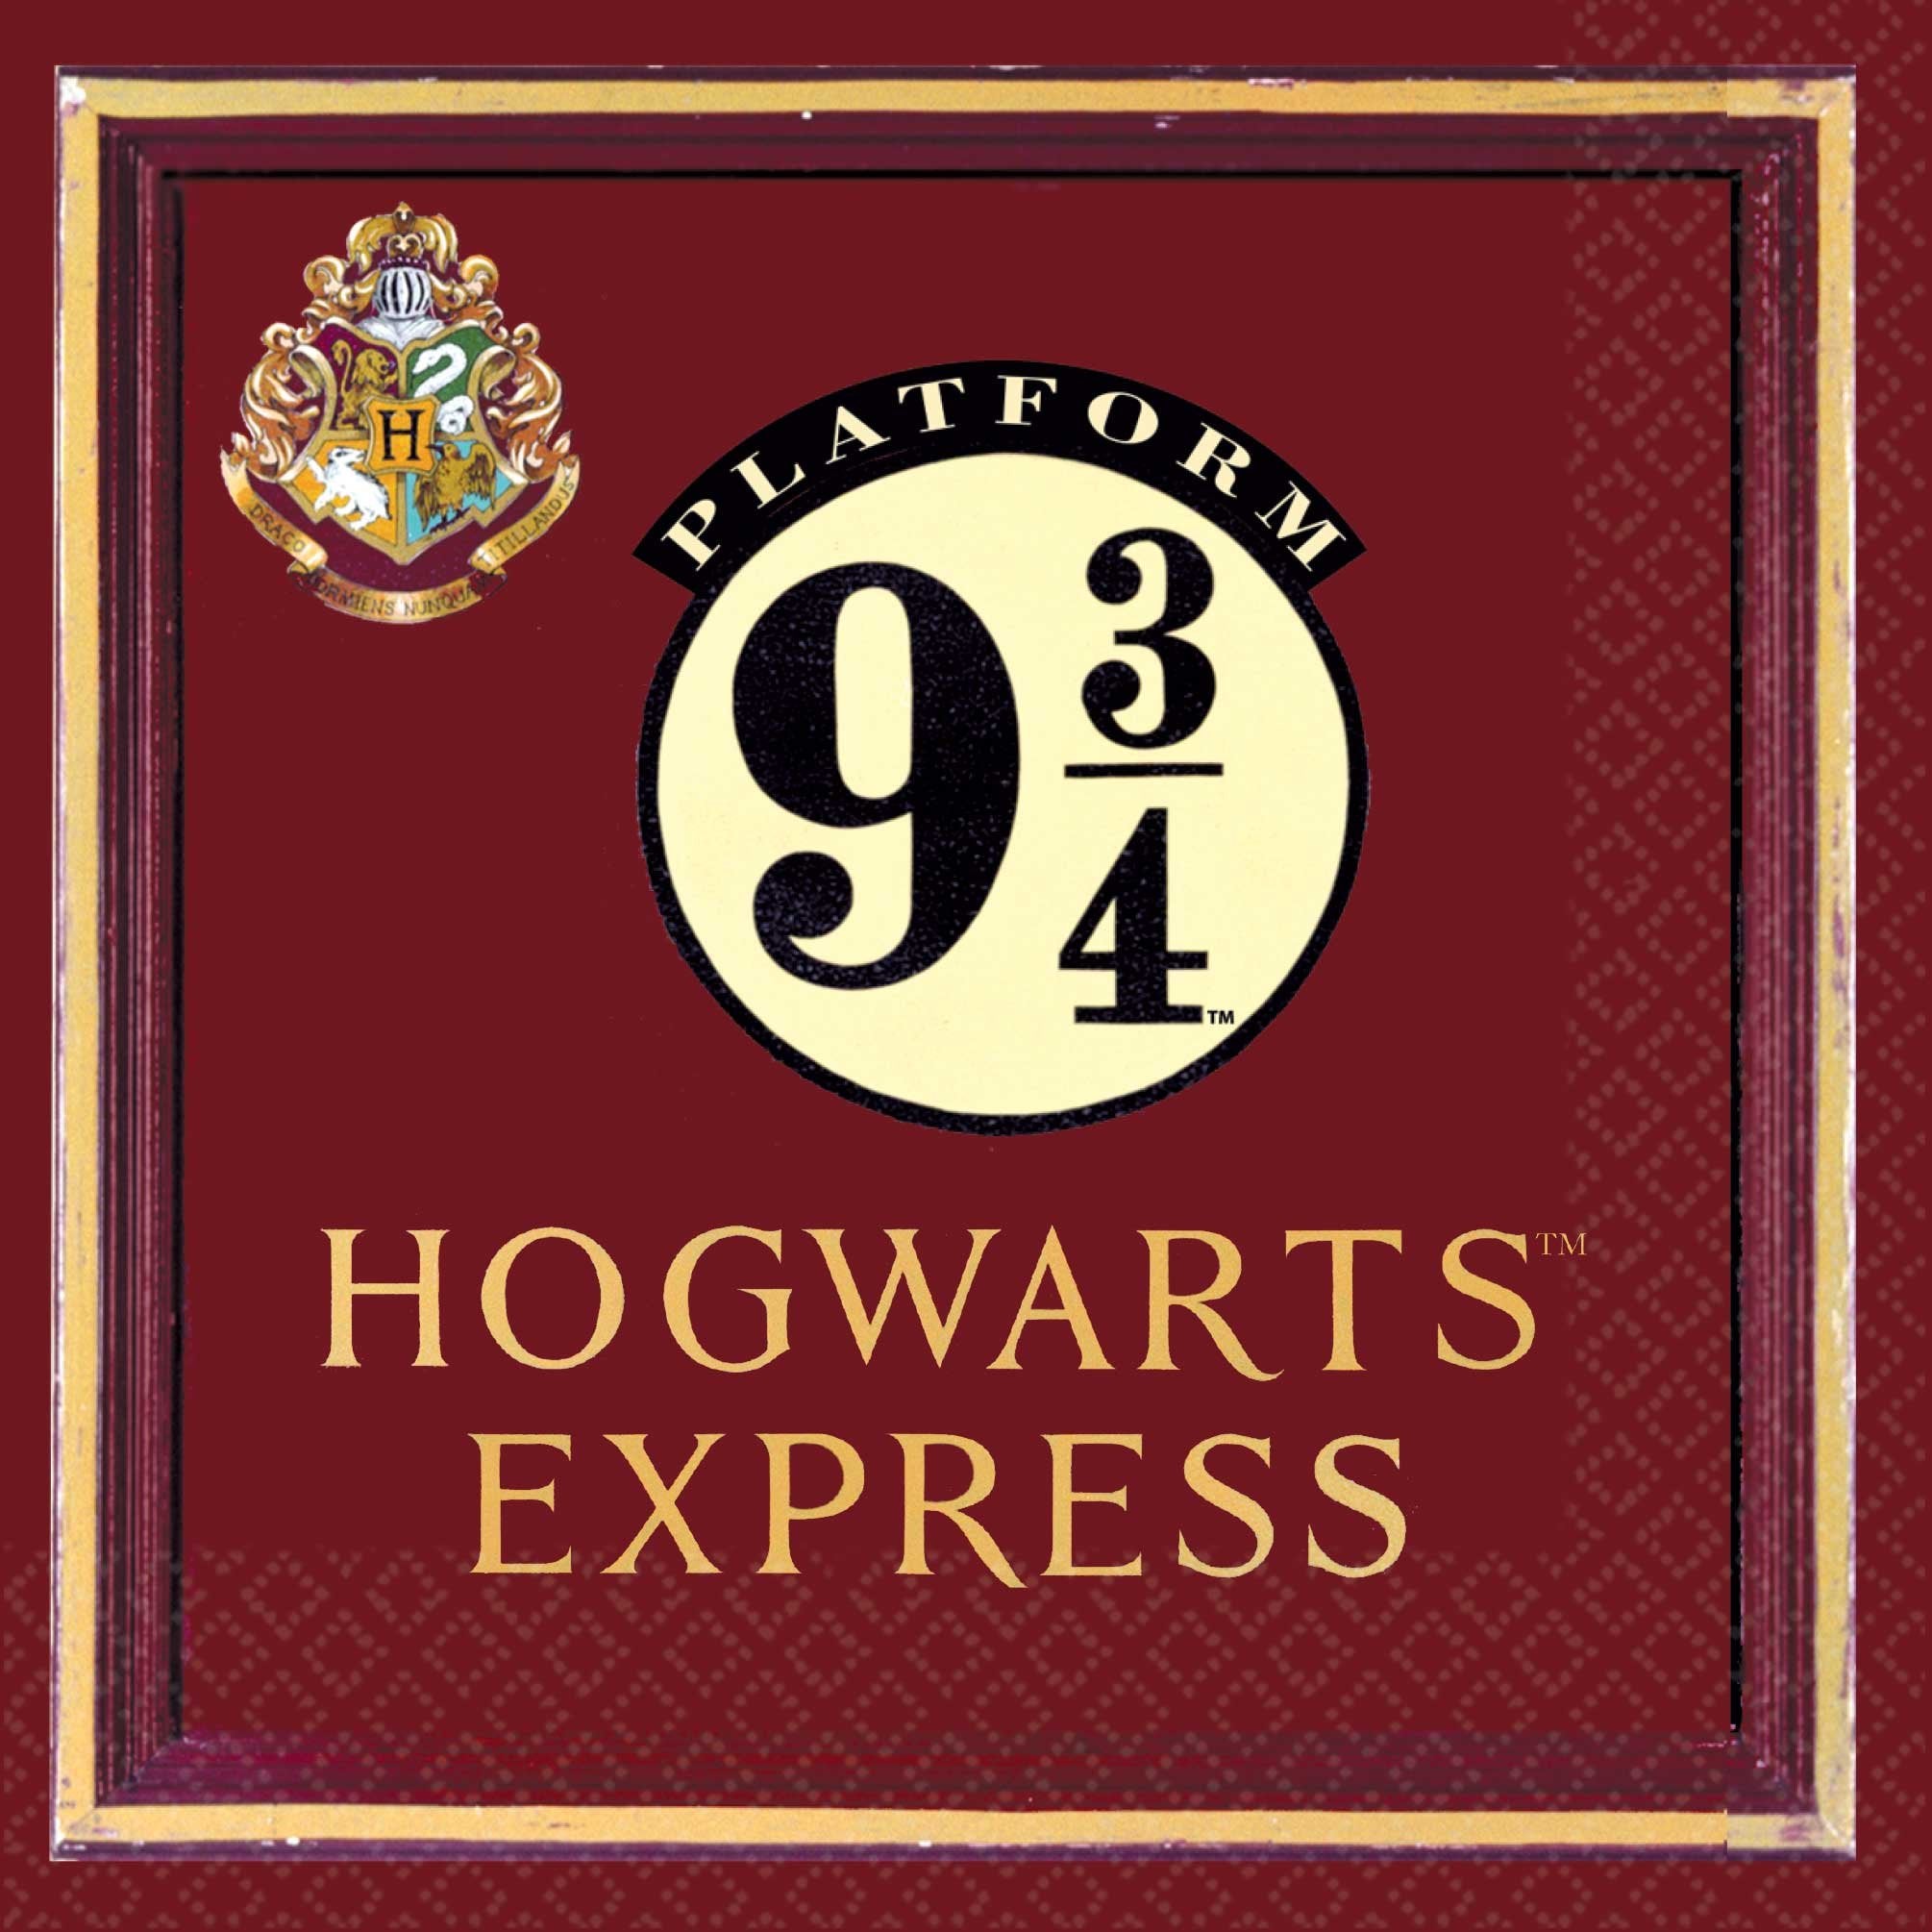 Step into the enchanting world of Hogwarts with Party Empress' magical Harry Potter decorations!  Transform your space into a spellbinding realm filled with wonder and whimsy, inspired by the beloved wizarding world of Harry Potter.